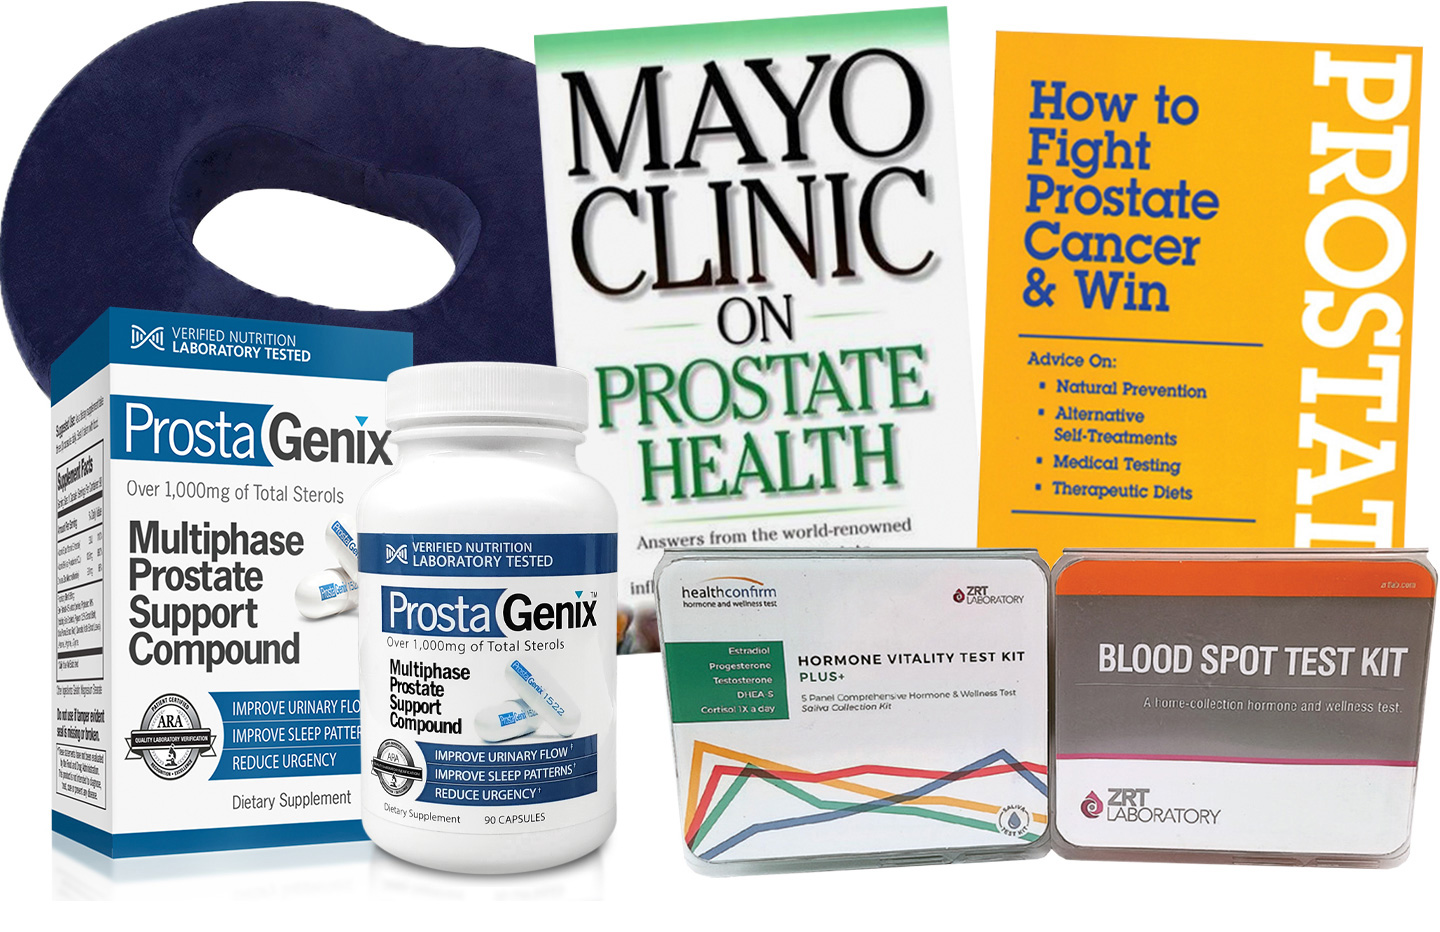 Smart Prostate Solutions